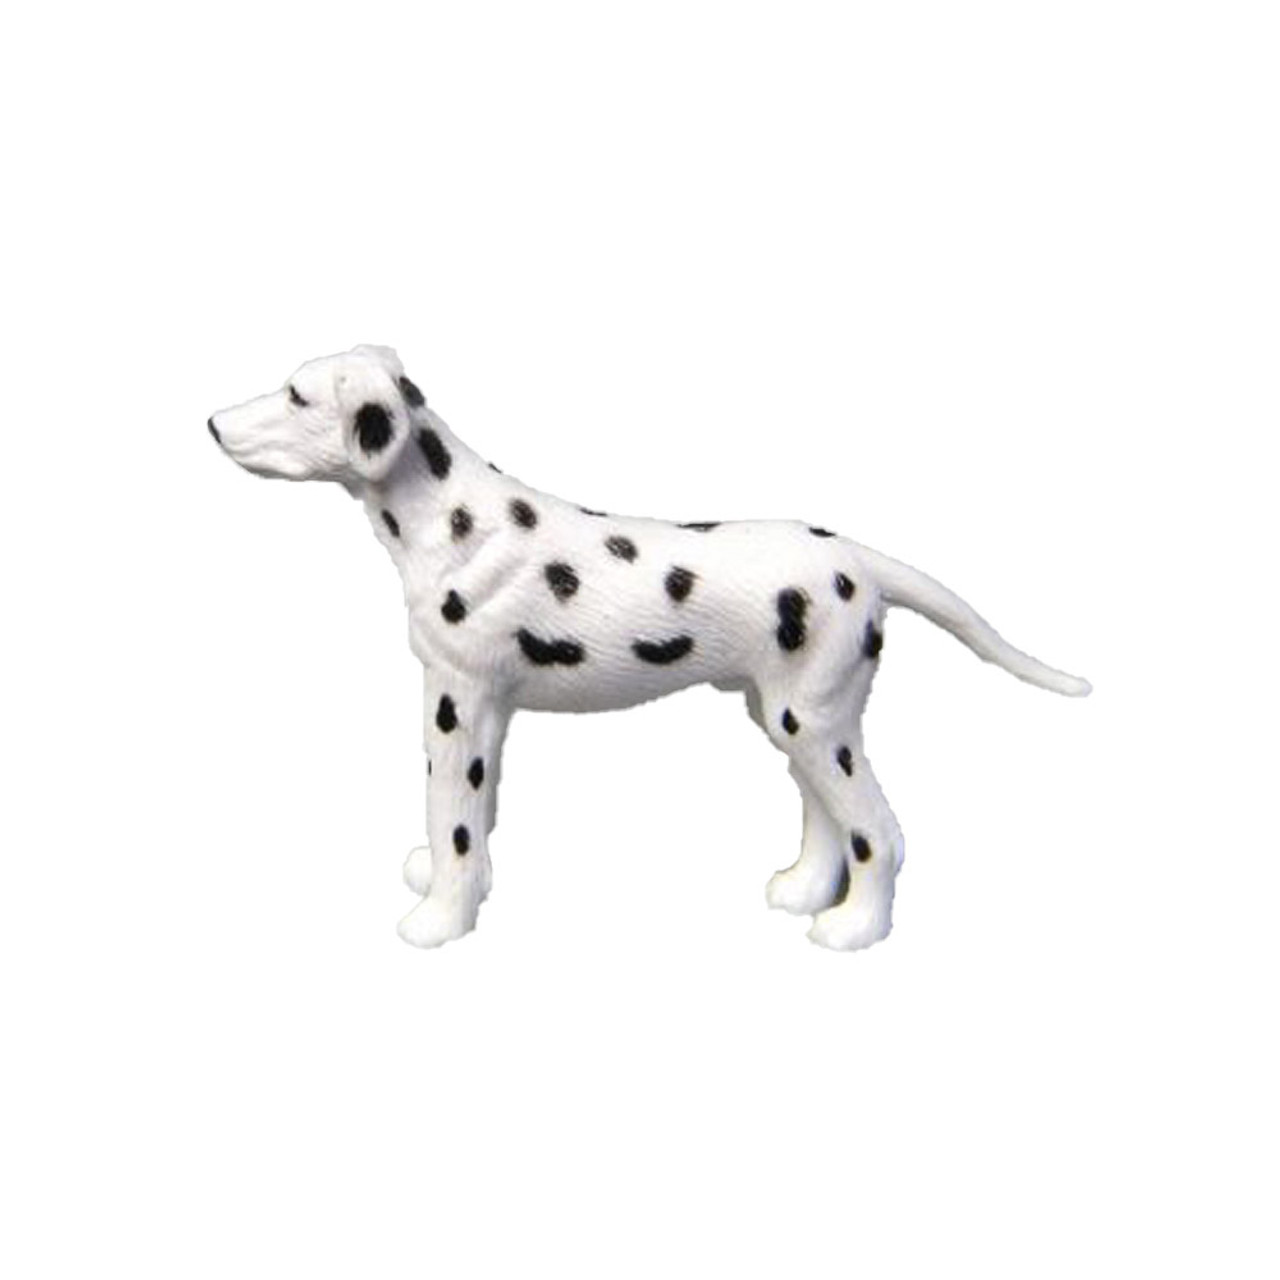 Plastic Dalmatian Toy Dog 2 1/2 inches long - F2018 B64 - Collectible ...